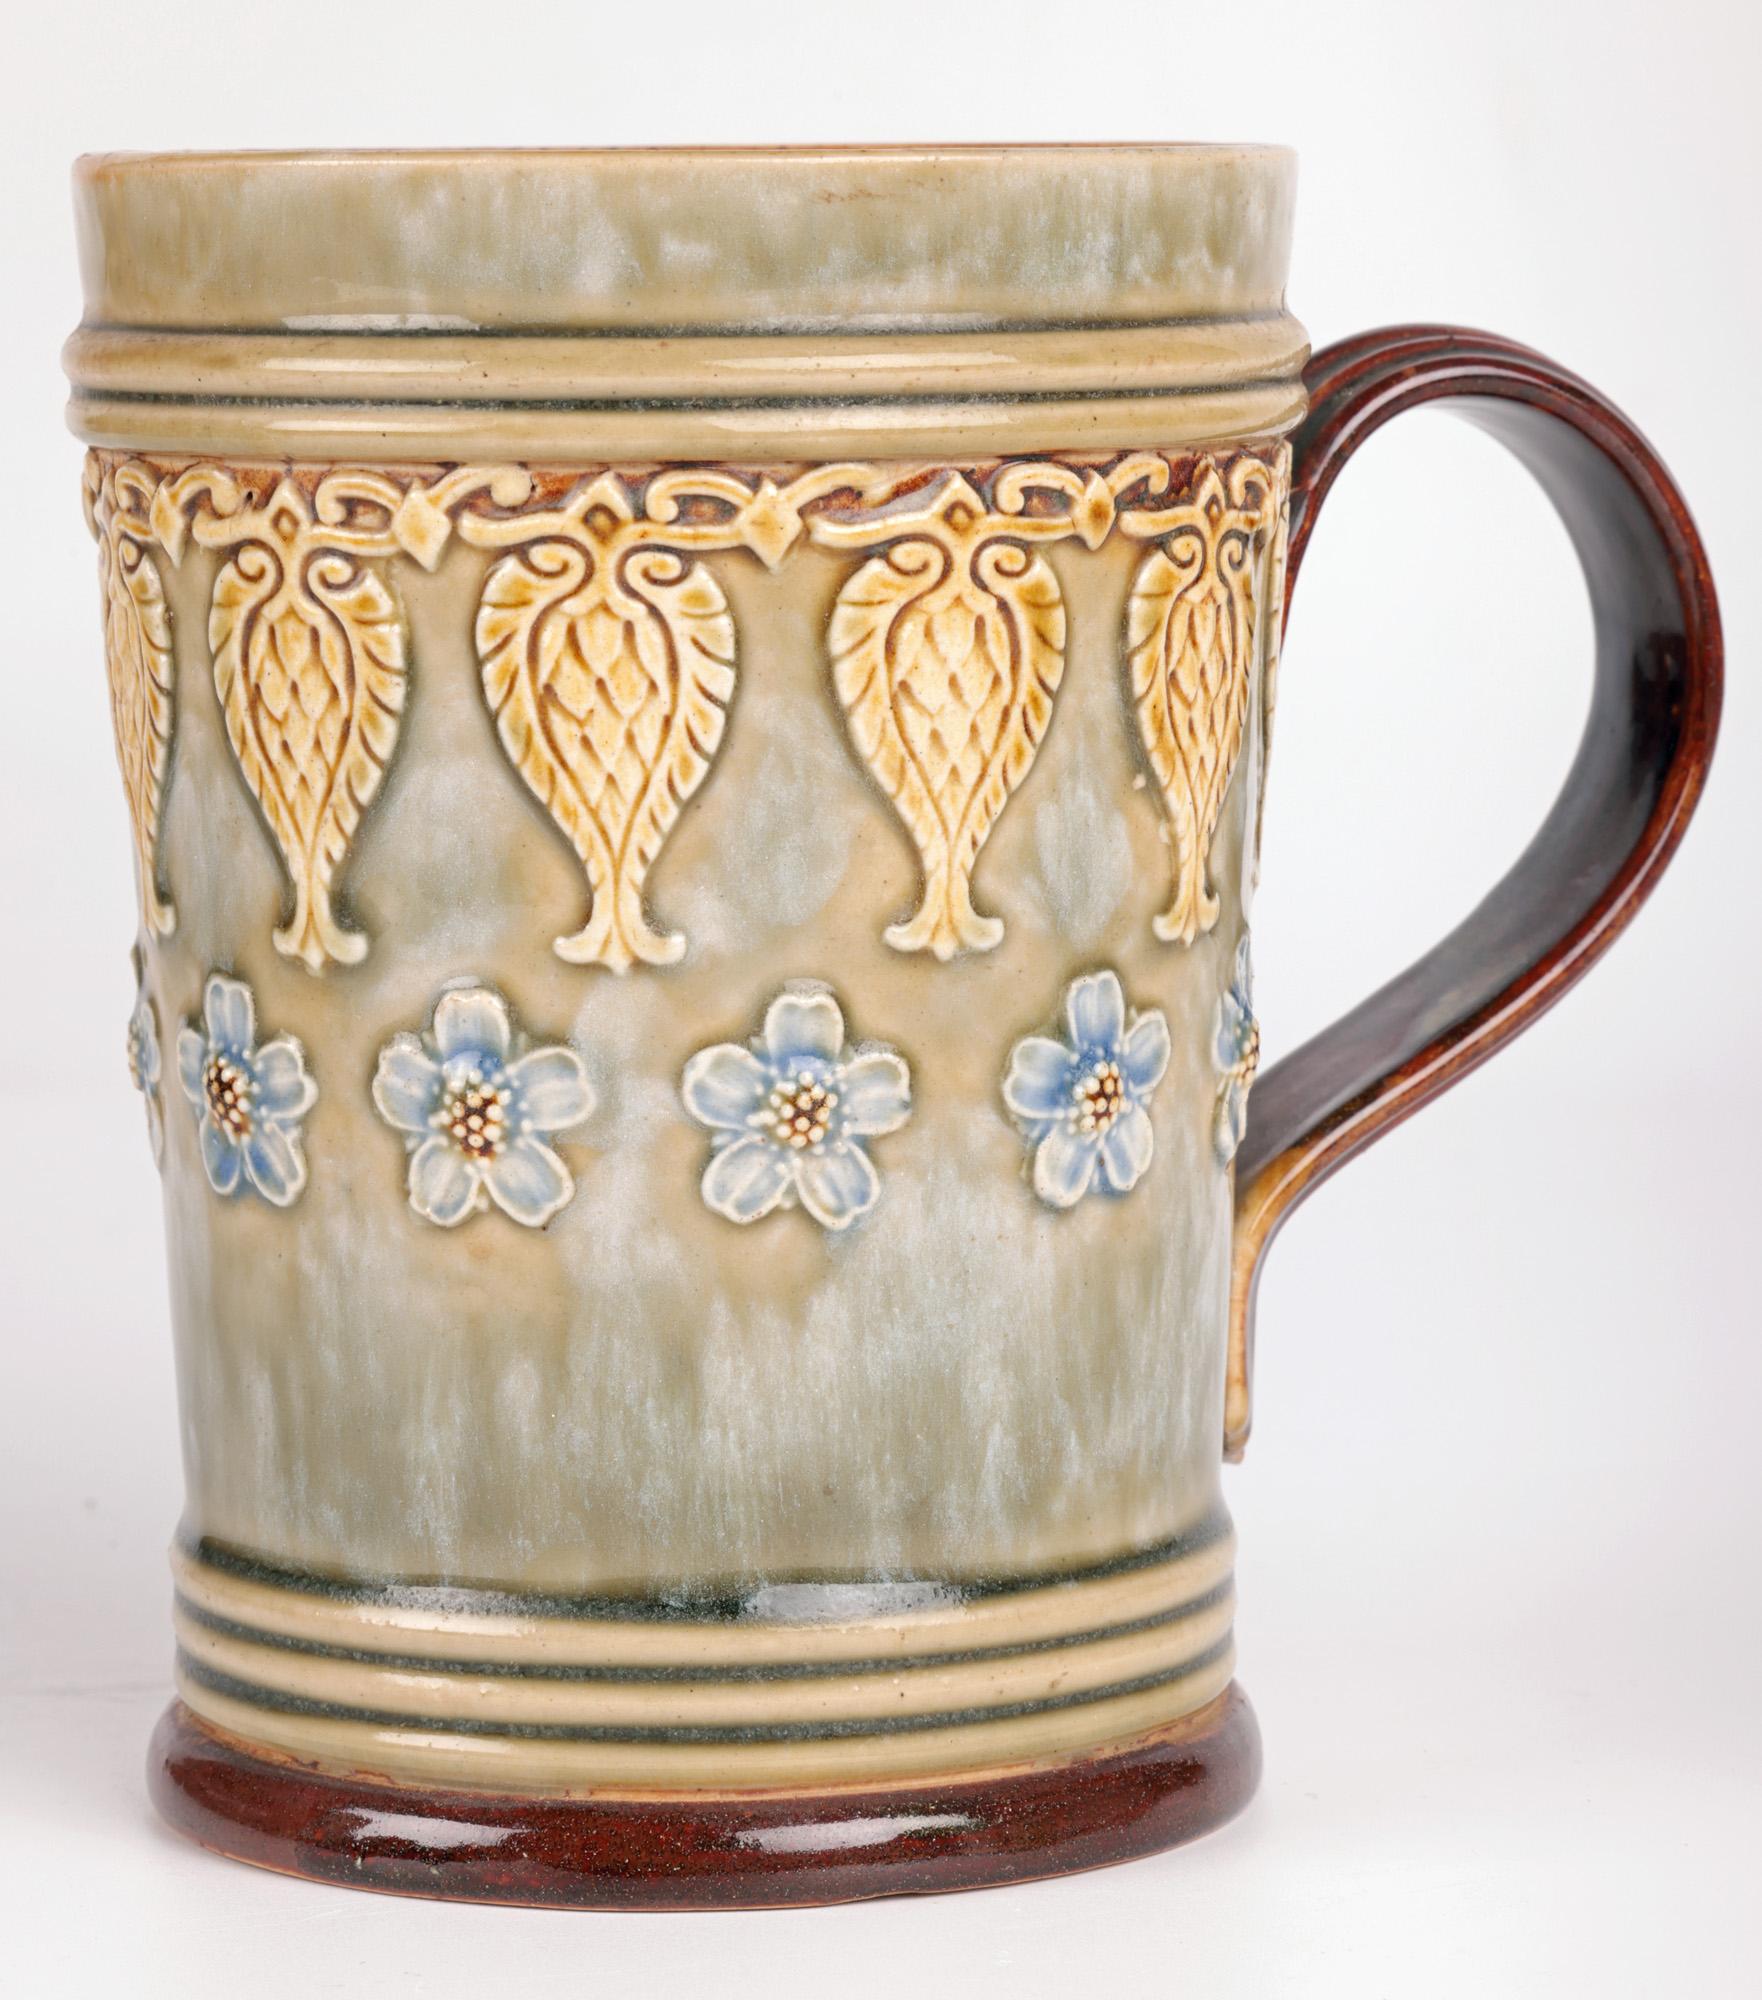 A very stylish pair Art Nouveau Doulton Lambeth floral design mugs by renowned artist Eleanor Tosen and dating from around 1905. We believe that these are original designs by Eleanor Tosen bearing her personal monogram mark. The stoneware mugs are